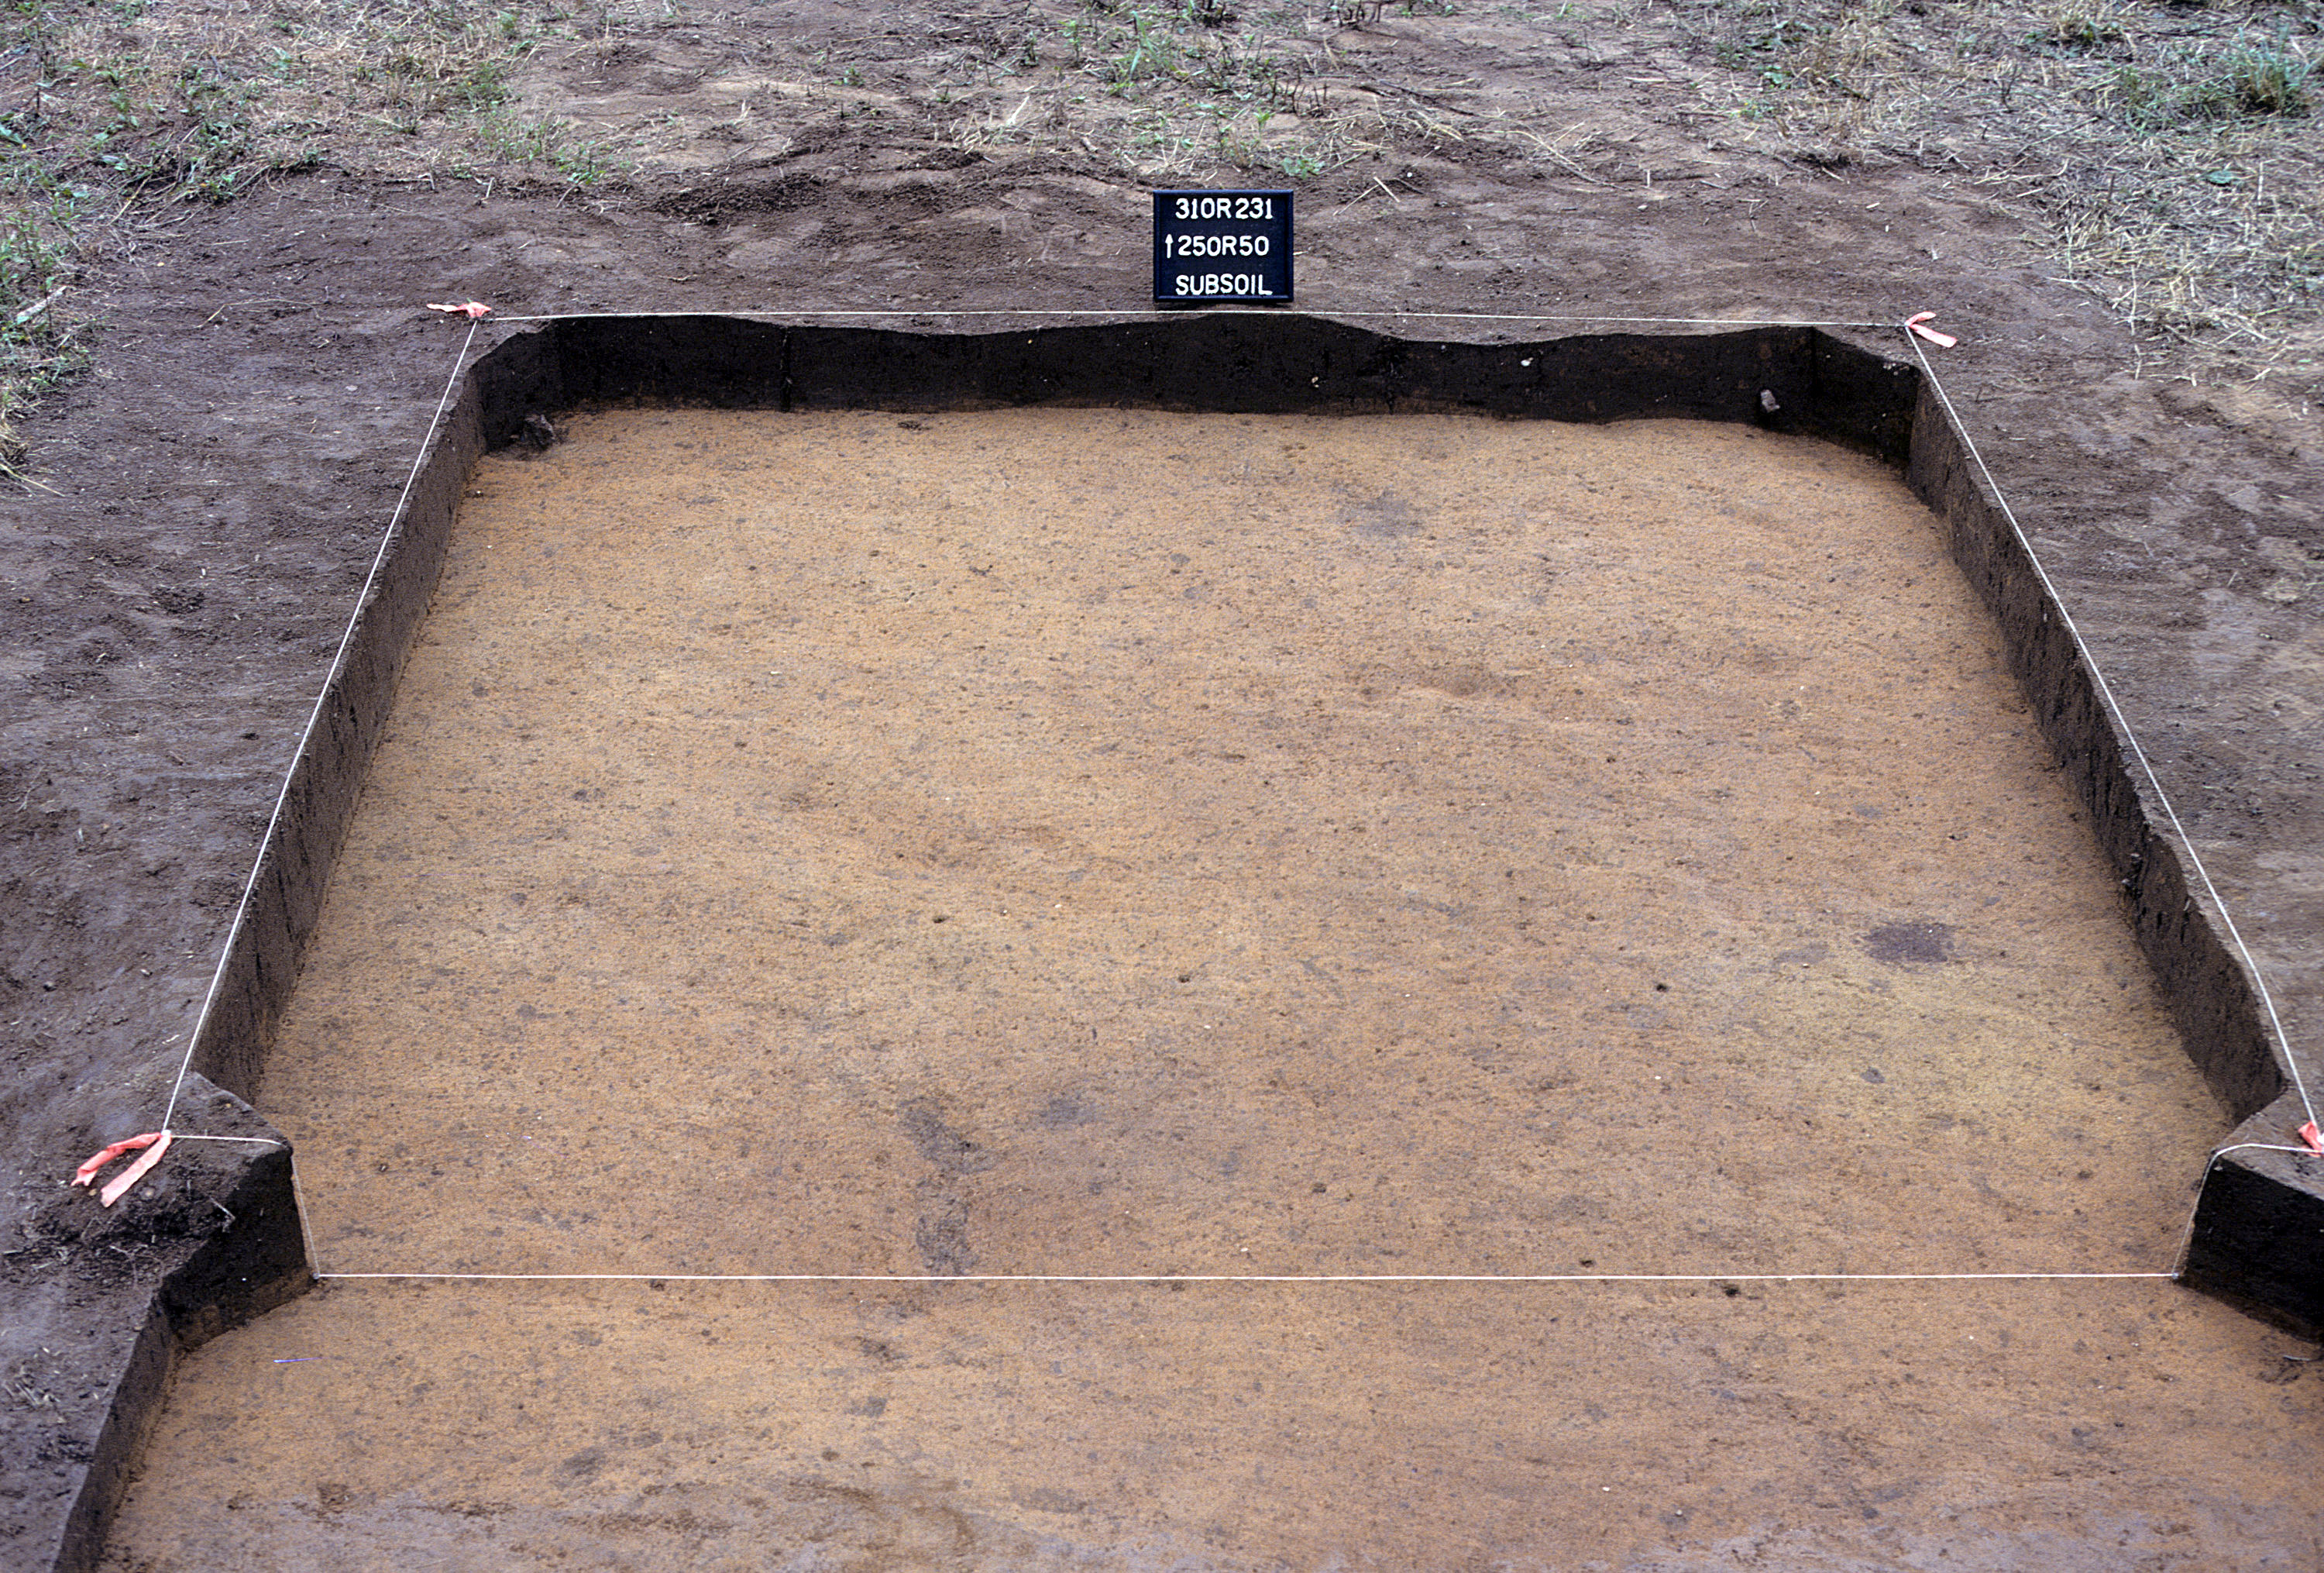 Figure 883. Sq. 250R50 at top of subsoil (view to north).